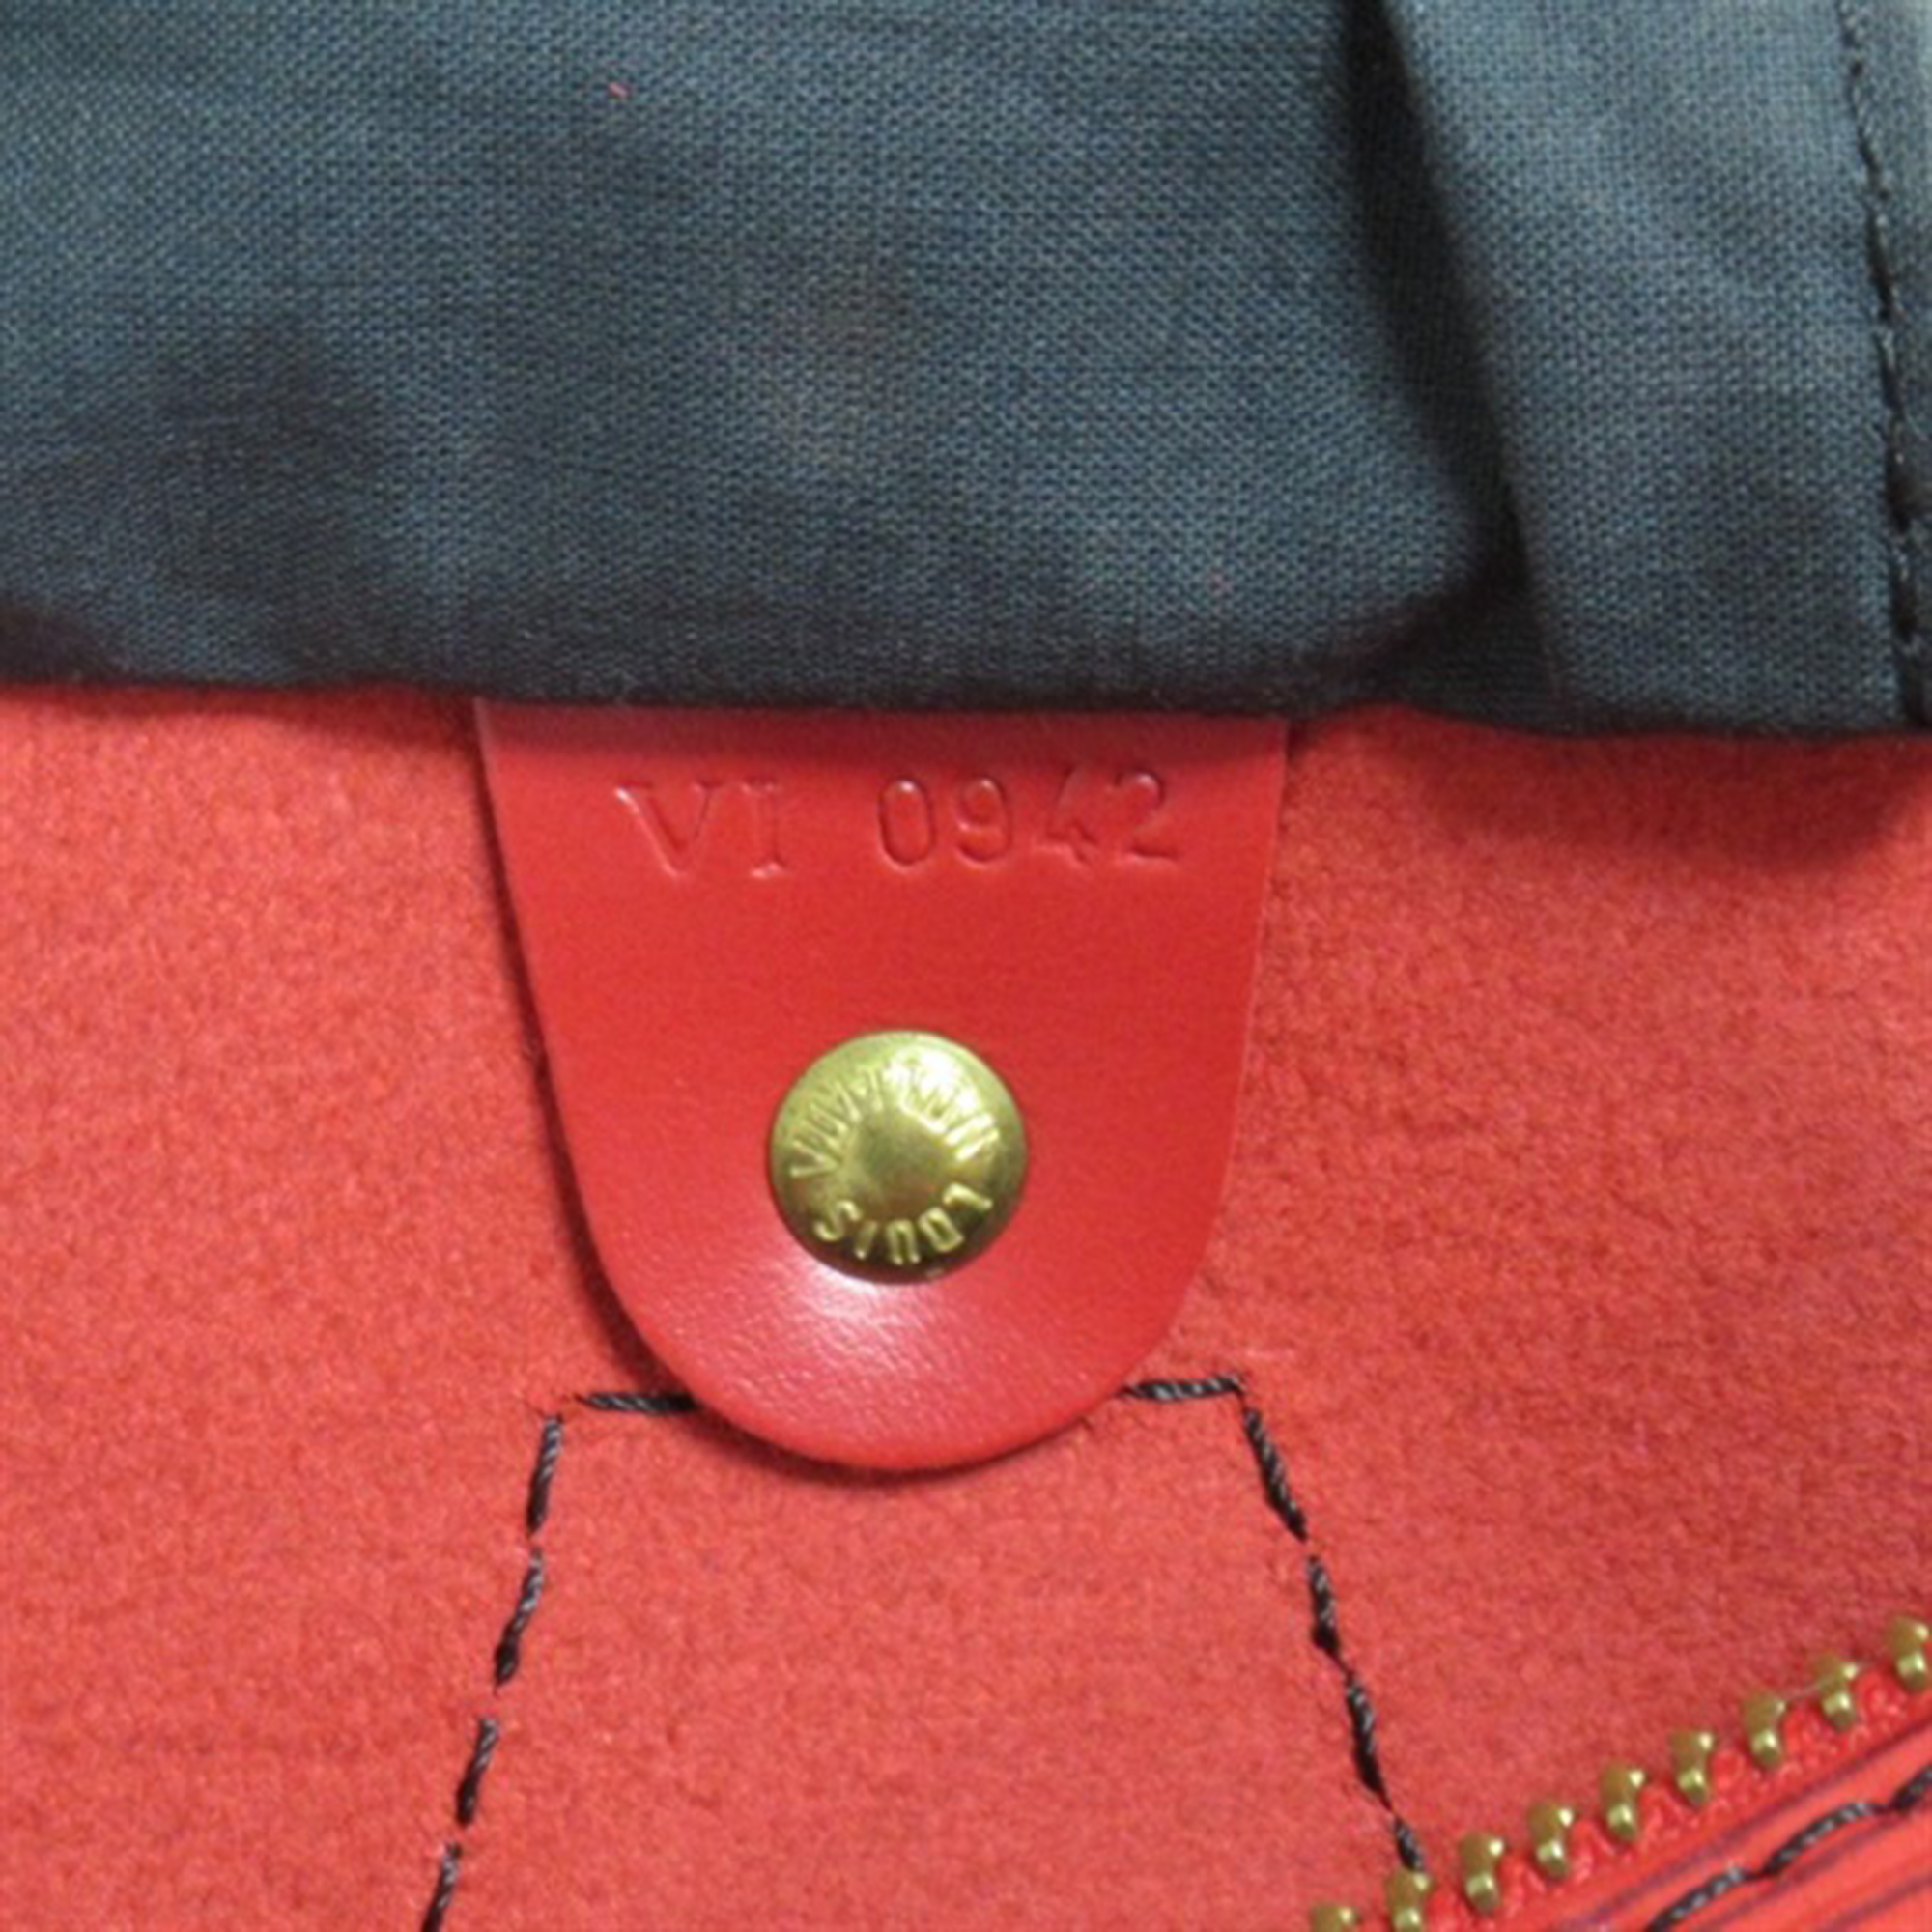 Louis Vuitton Red Epi Leather Speedy 30 Top Handle Bag